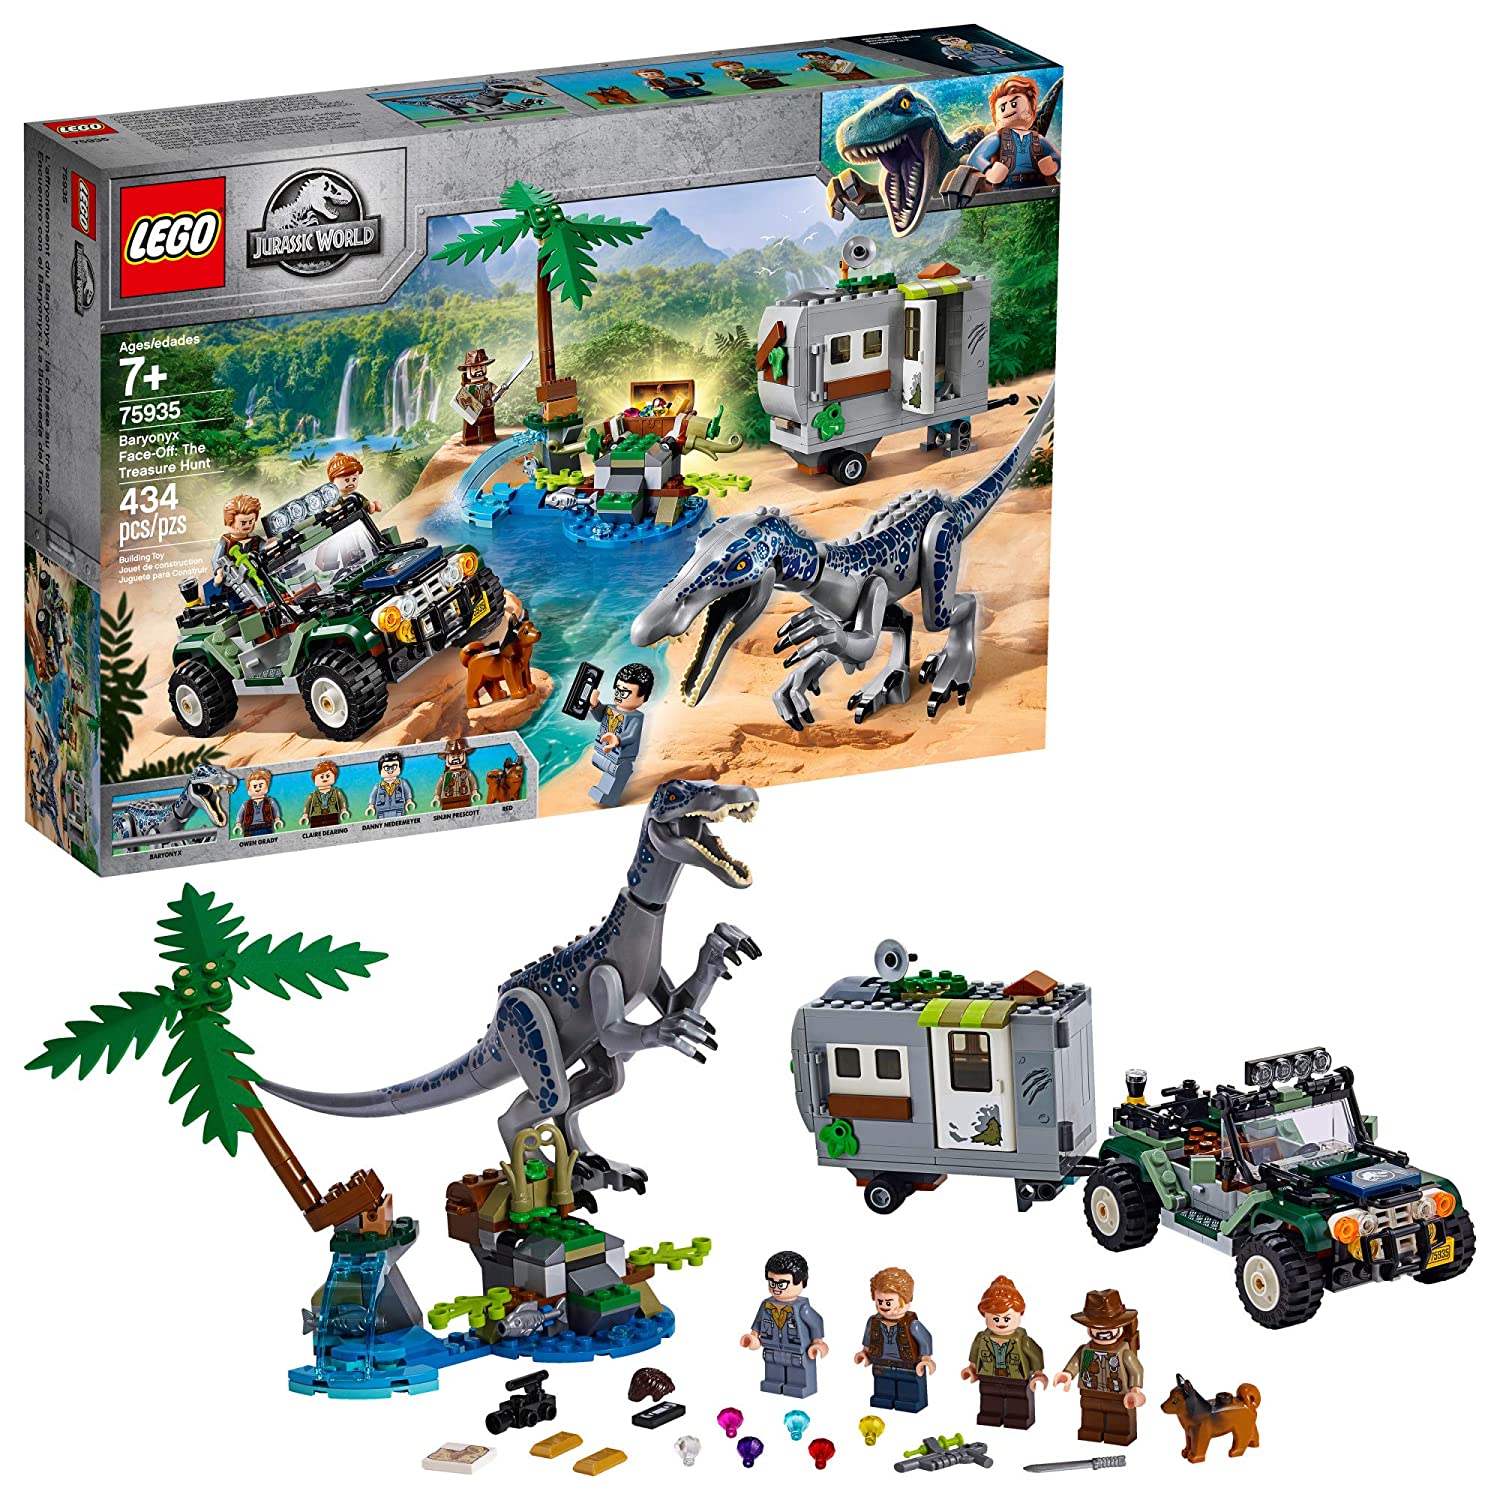 Top 8 Best Lego Dinosaurs Set Reviews in 2023 6